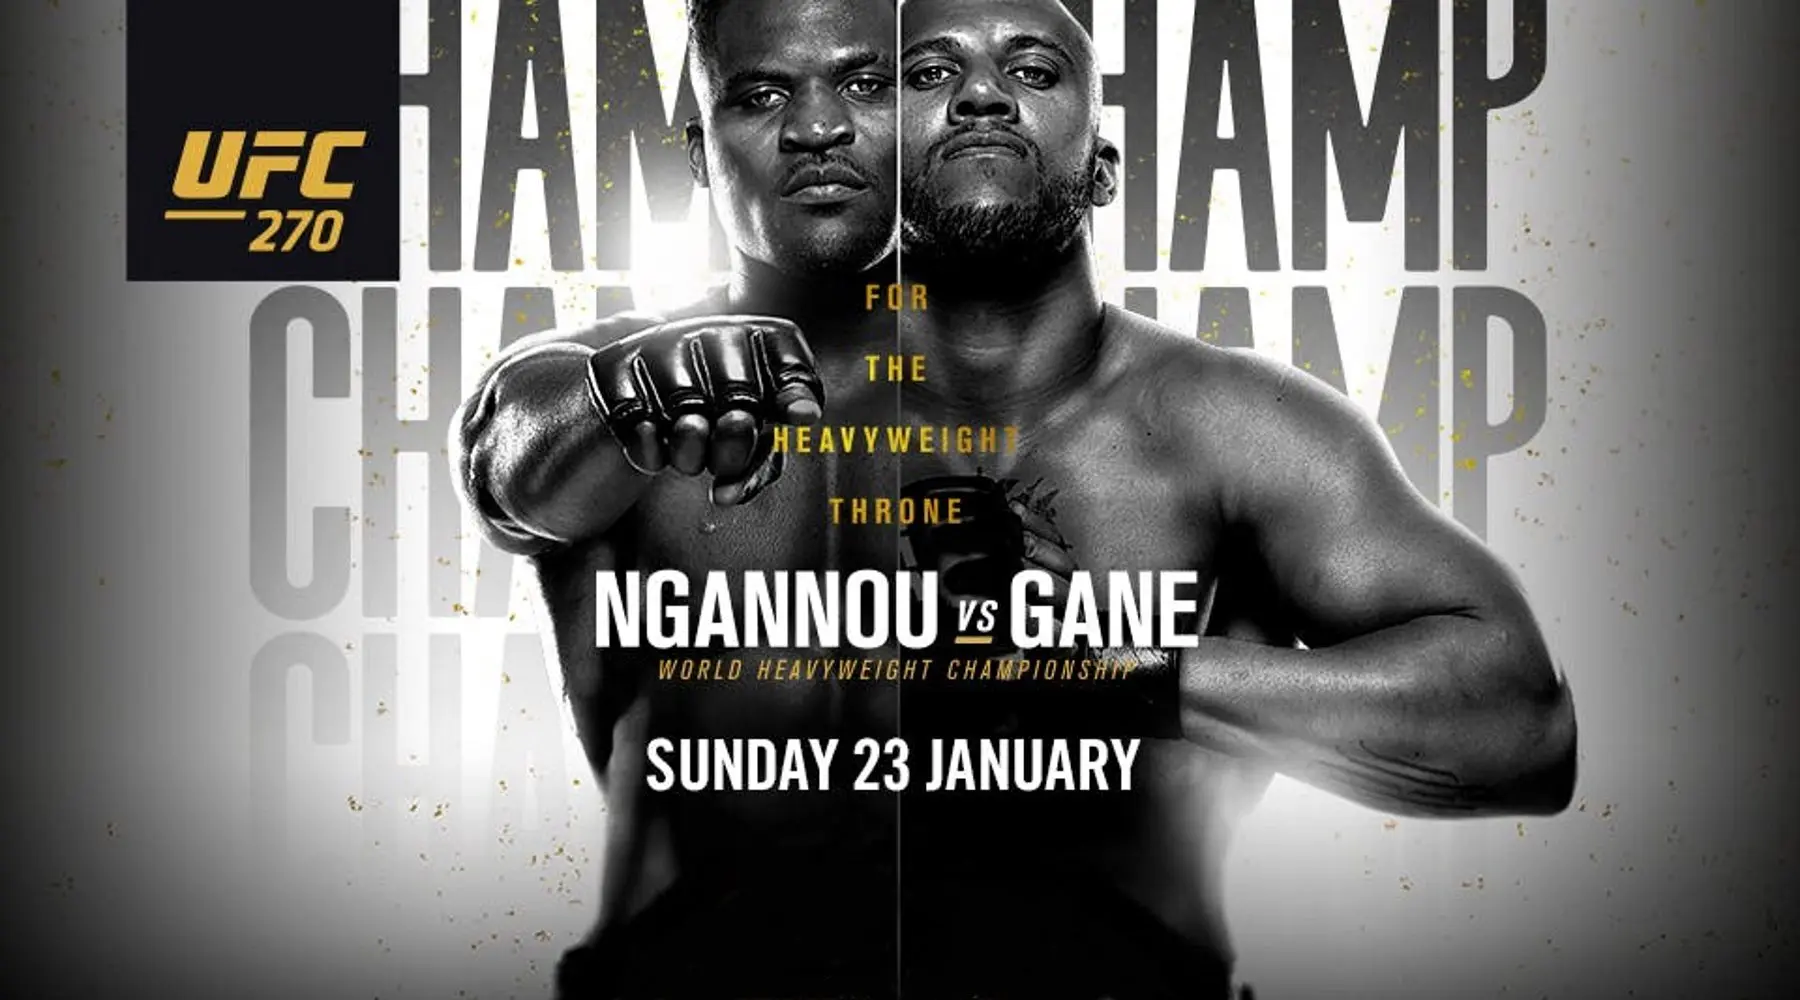 How to watch UFC 270 Ngannou vs Gane online and start time Finder